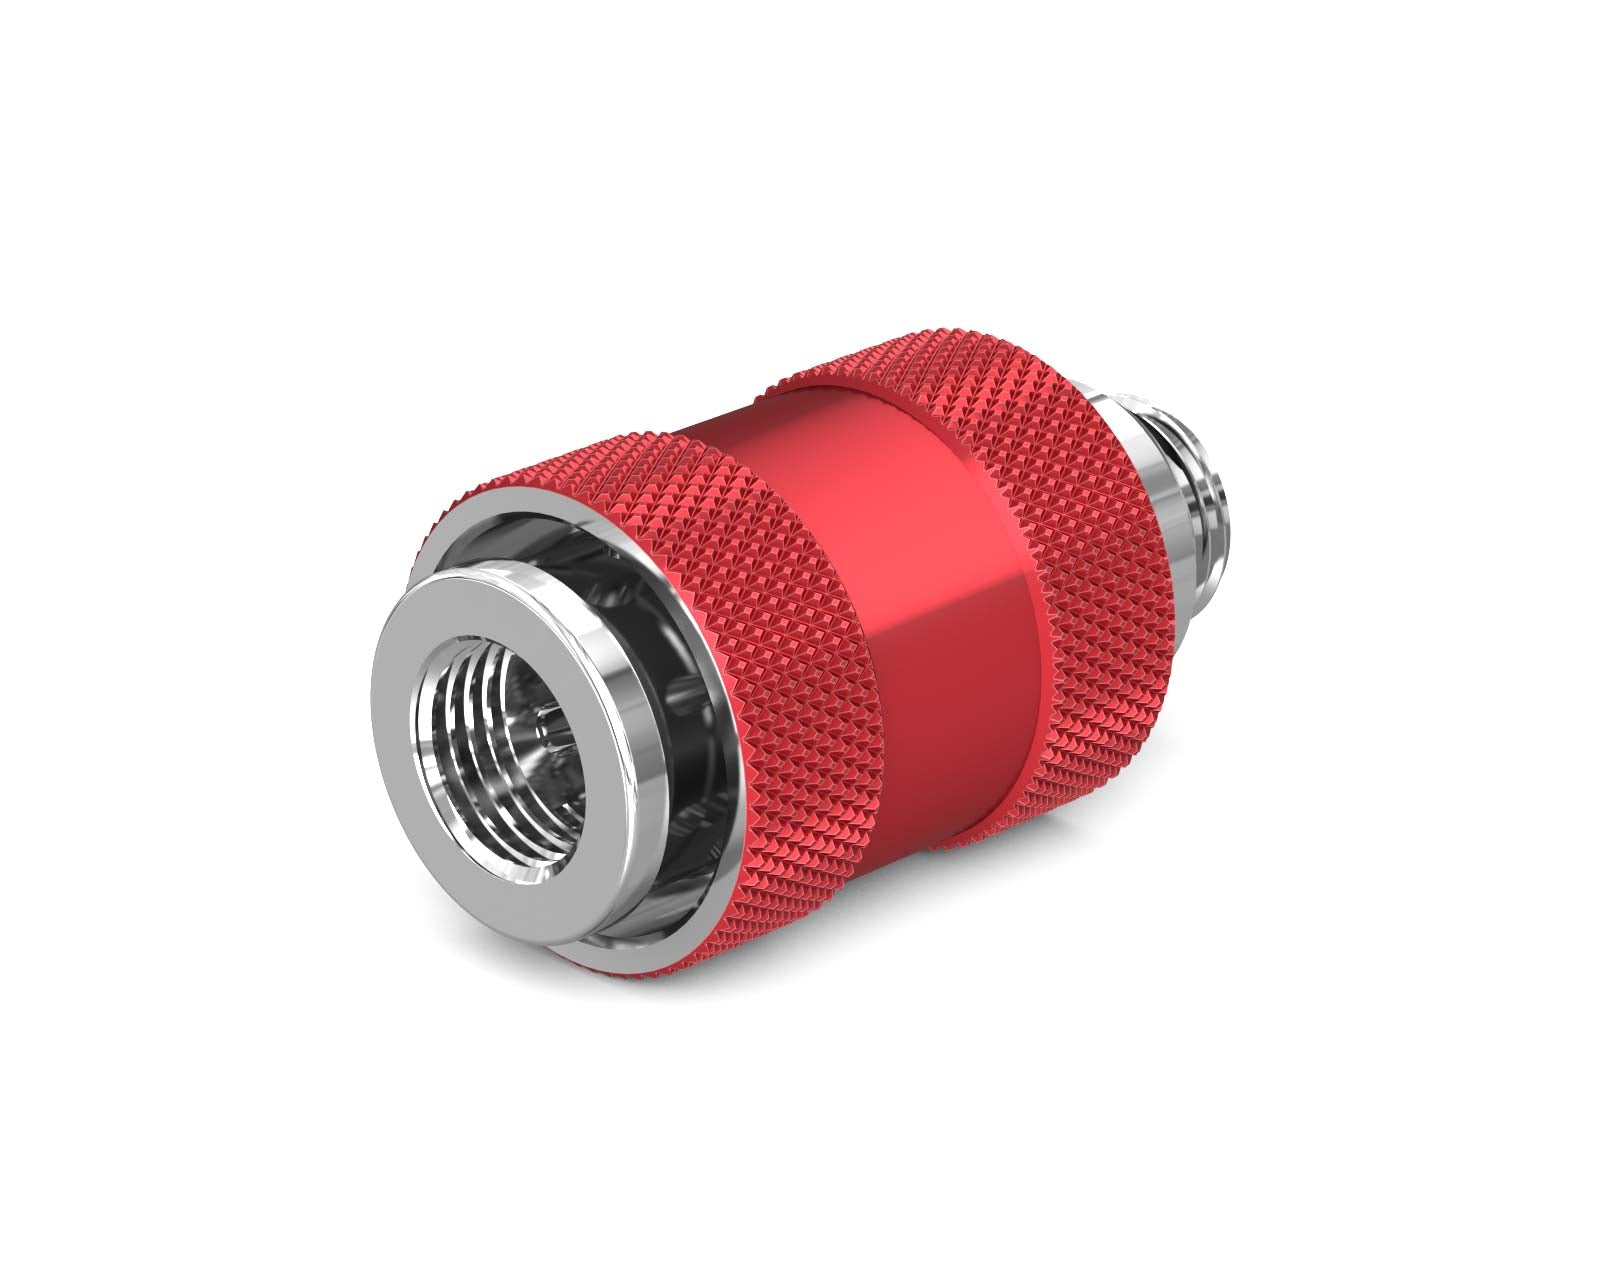 PrimoChill Male to Female G 1/4 SX Pull Drain Valve - PrimoChill - KEEPING IT COOL Candy Red